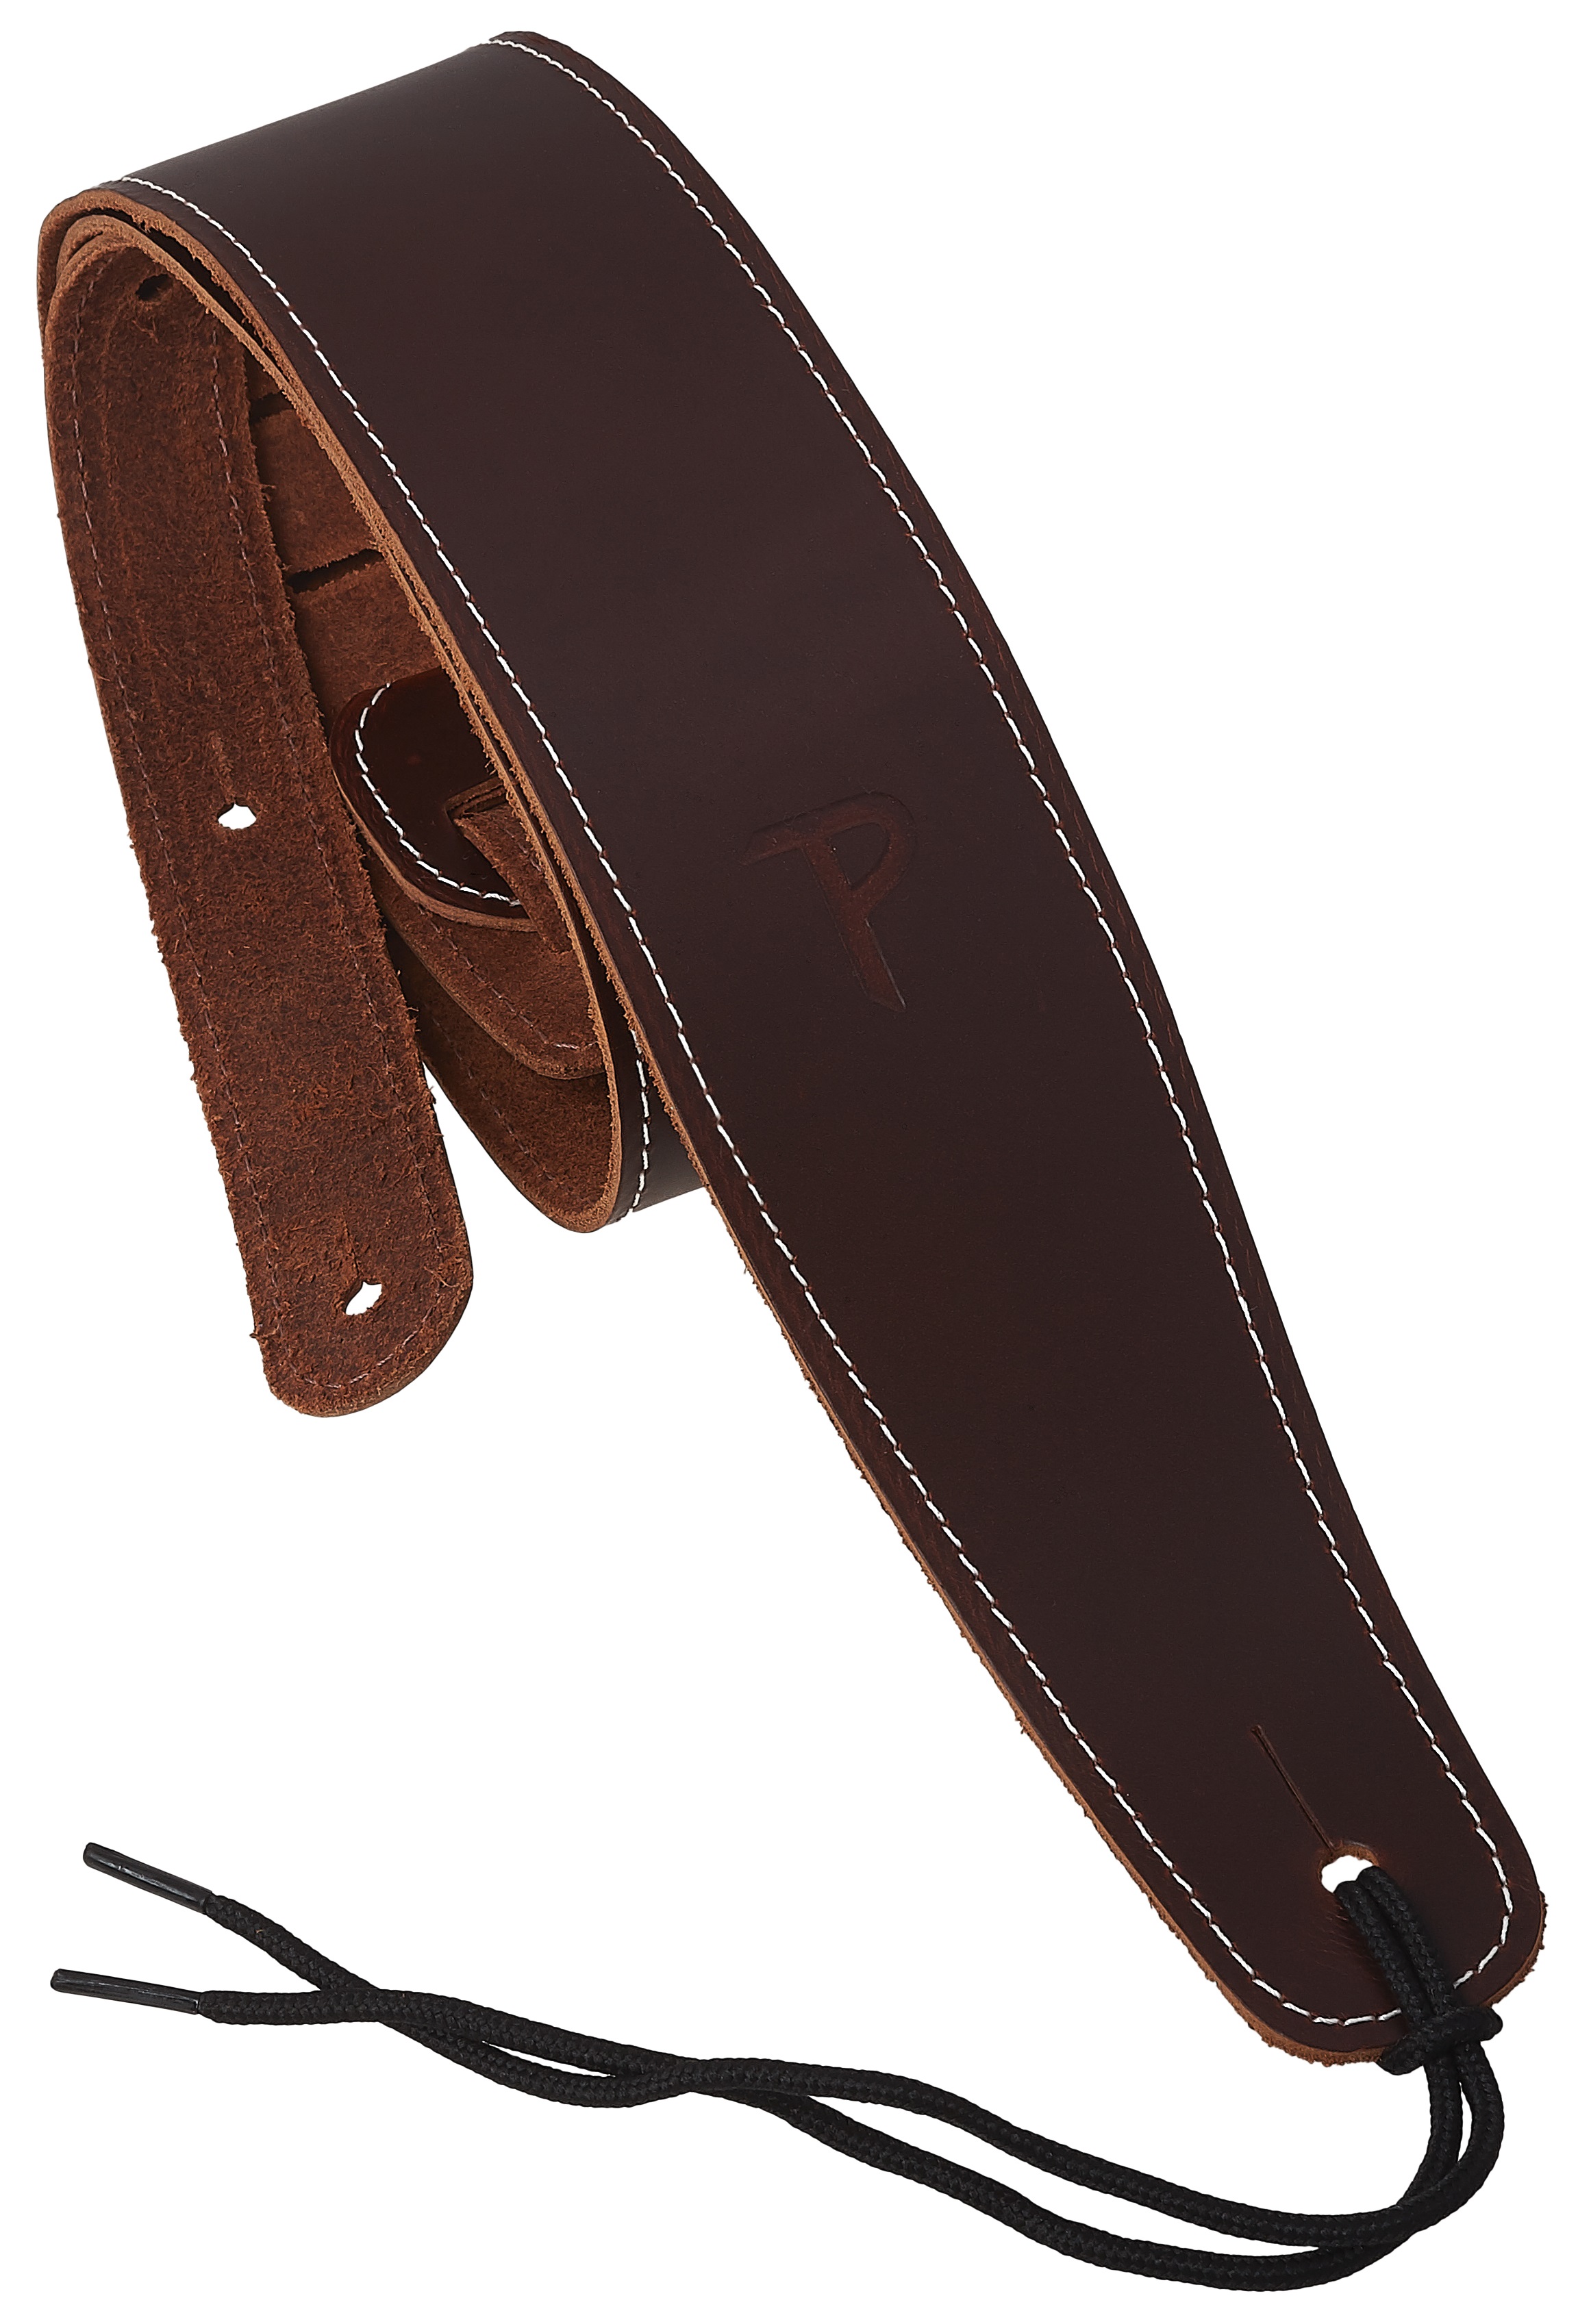 Perri's Leathers 7050 The Baseball Leather Collection Brown